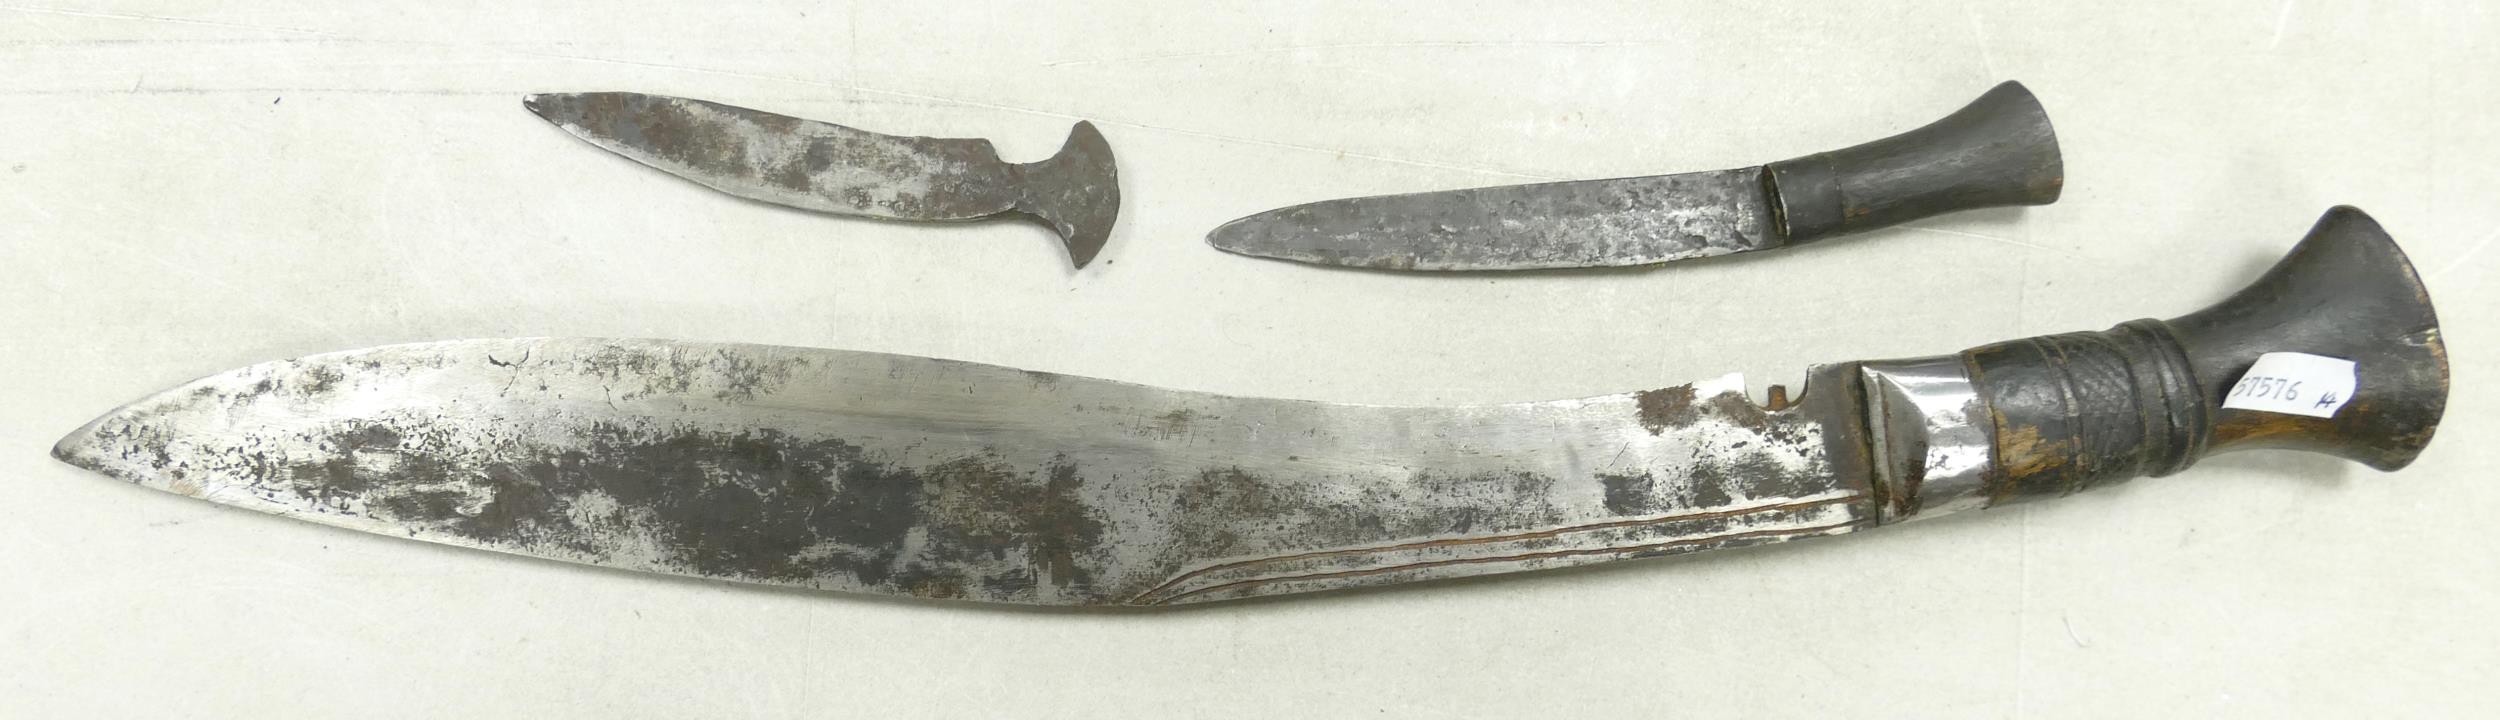 20th century Indian subcontinent Kukri knife, with two smaller blades, in leather sheath. 30.8cm - Image 2 of 3